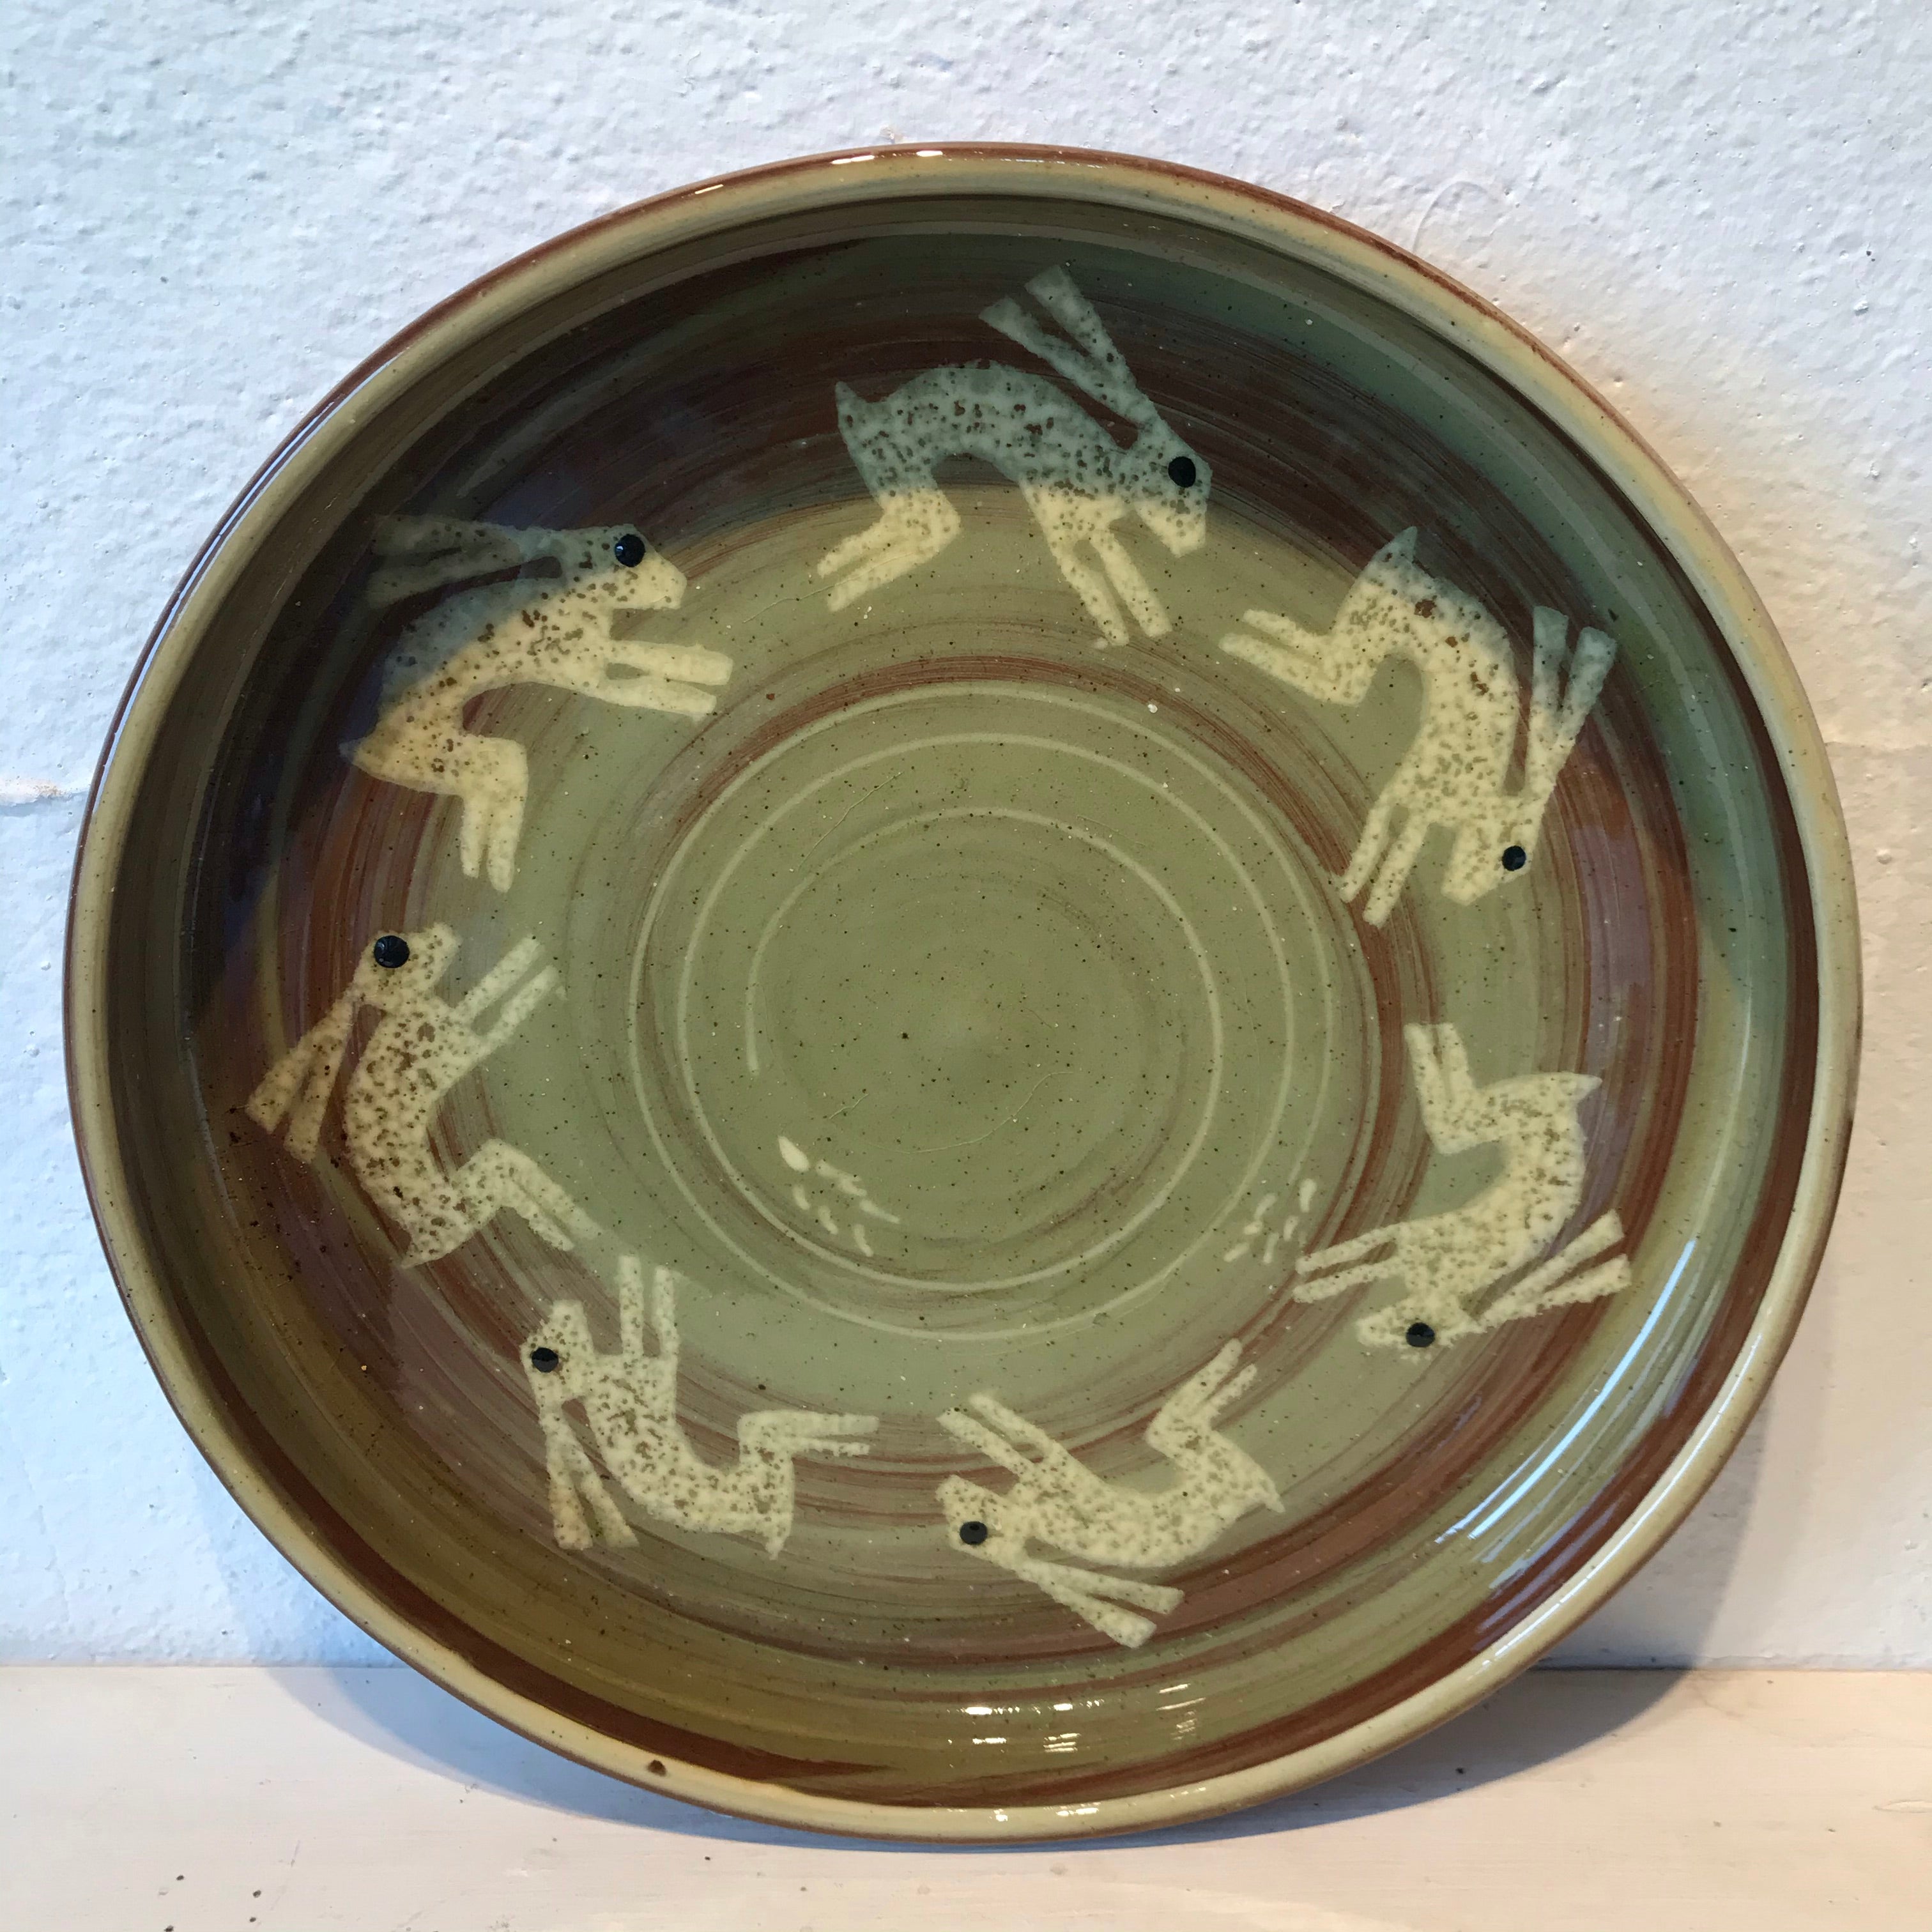 Pale Green Hare Plate